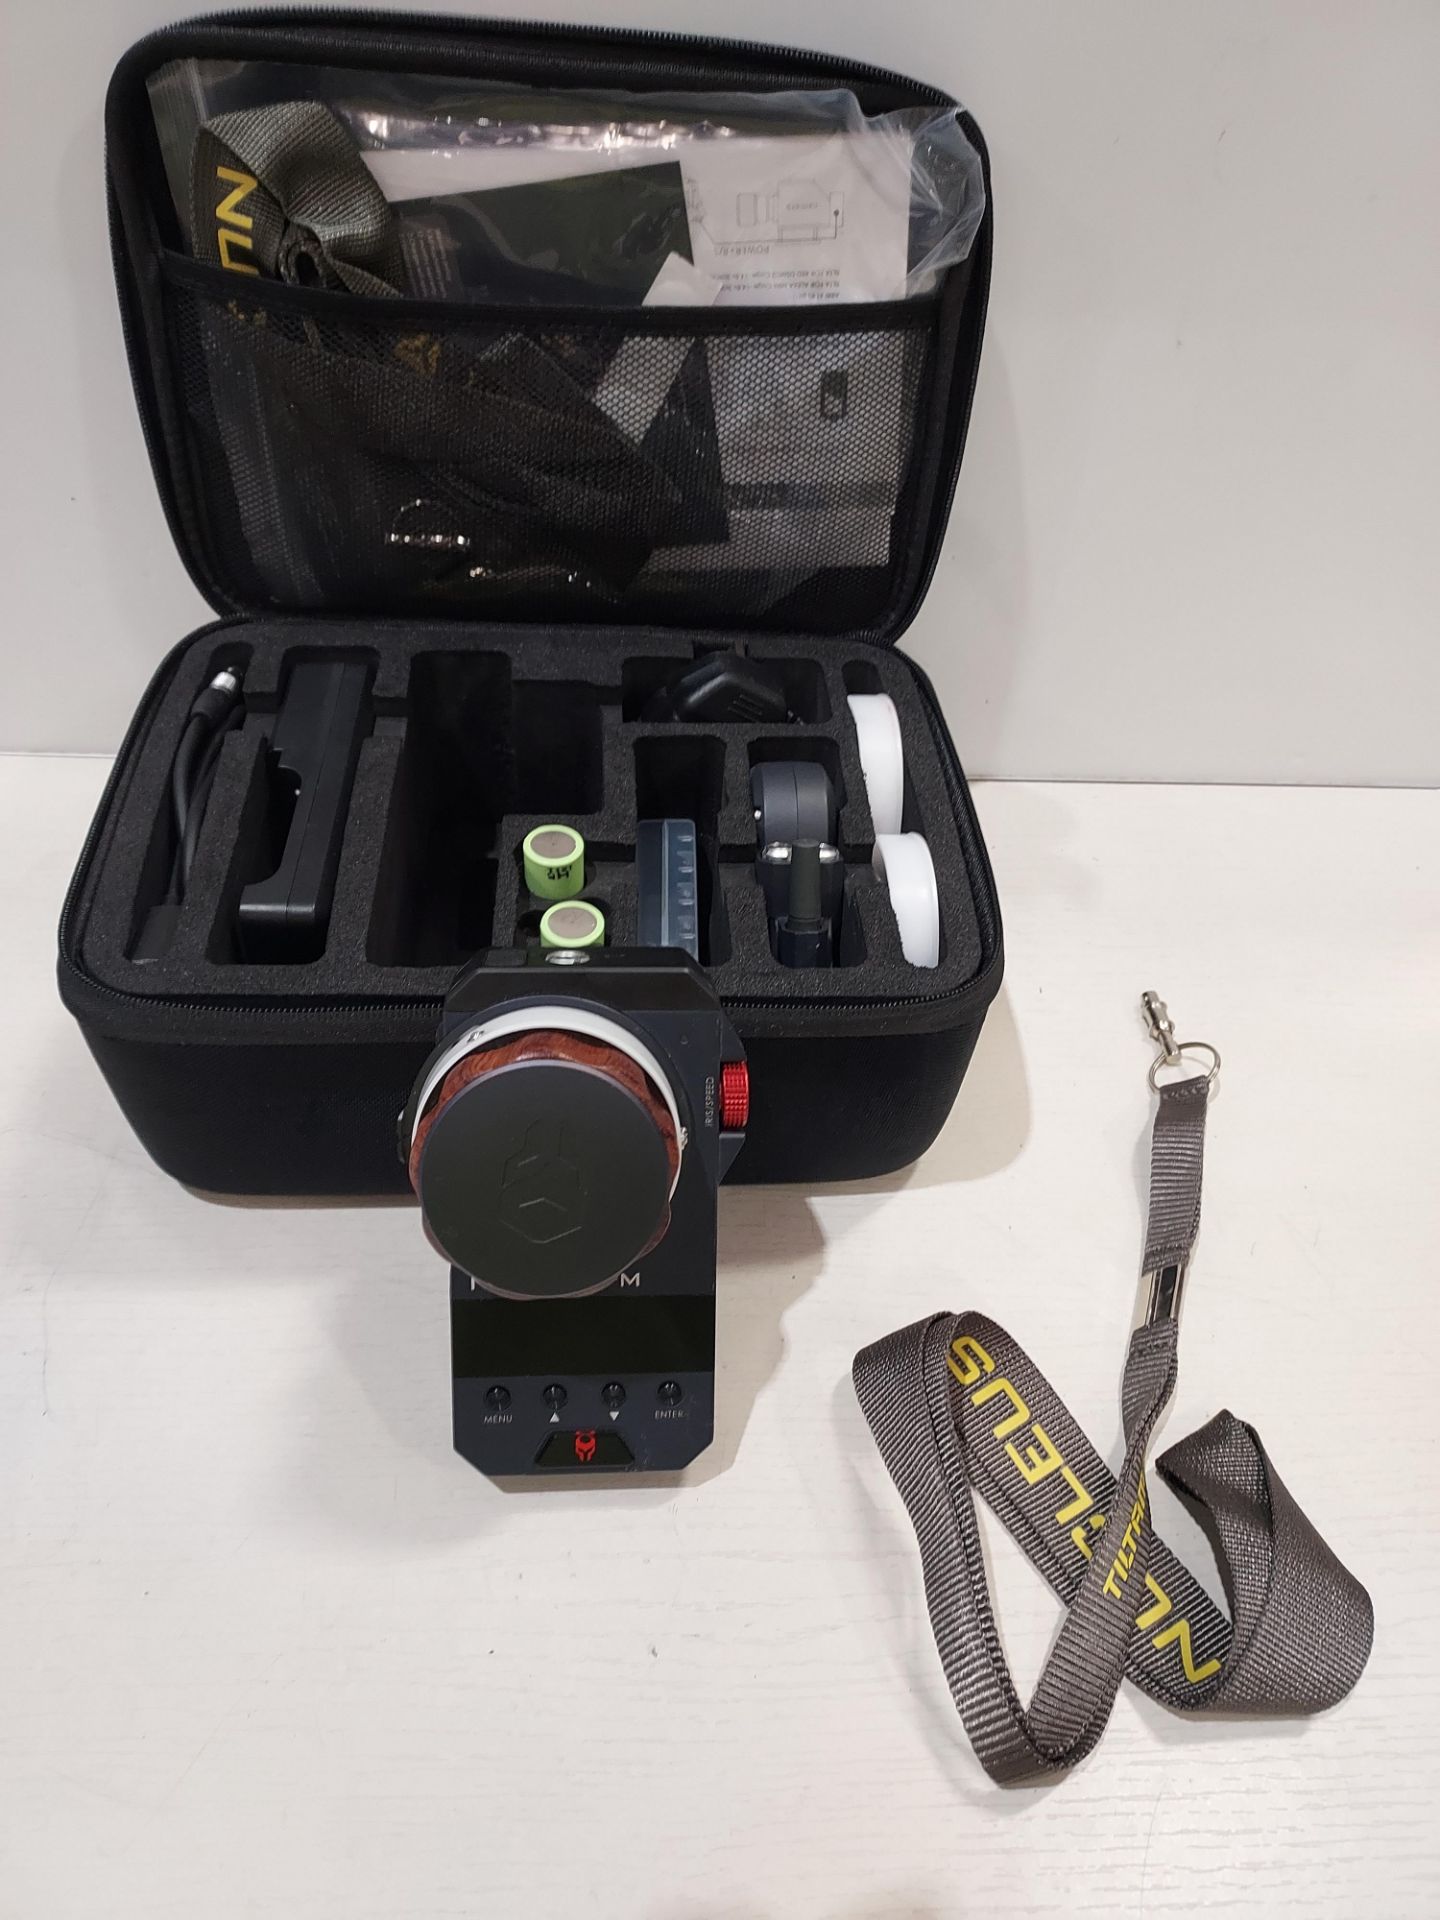 TILTA NUCLEUS-M WIRELESS LENS CONTROL SYSTEM CAMERA FOLLOW FOCUS PARTIAL KIT I - IN CARRY CASE - Image 2 of 2